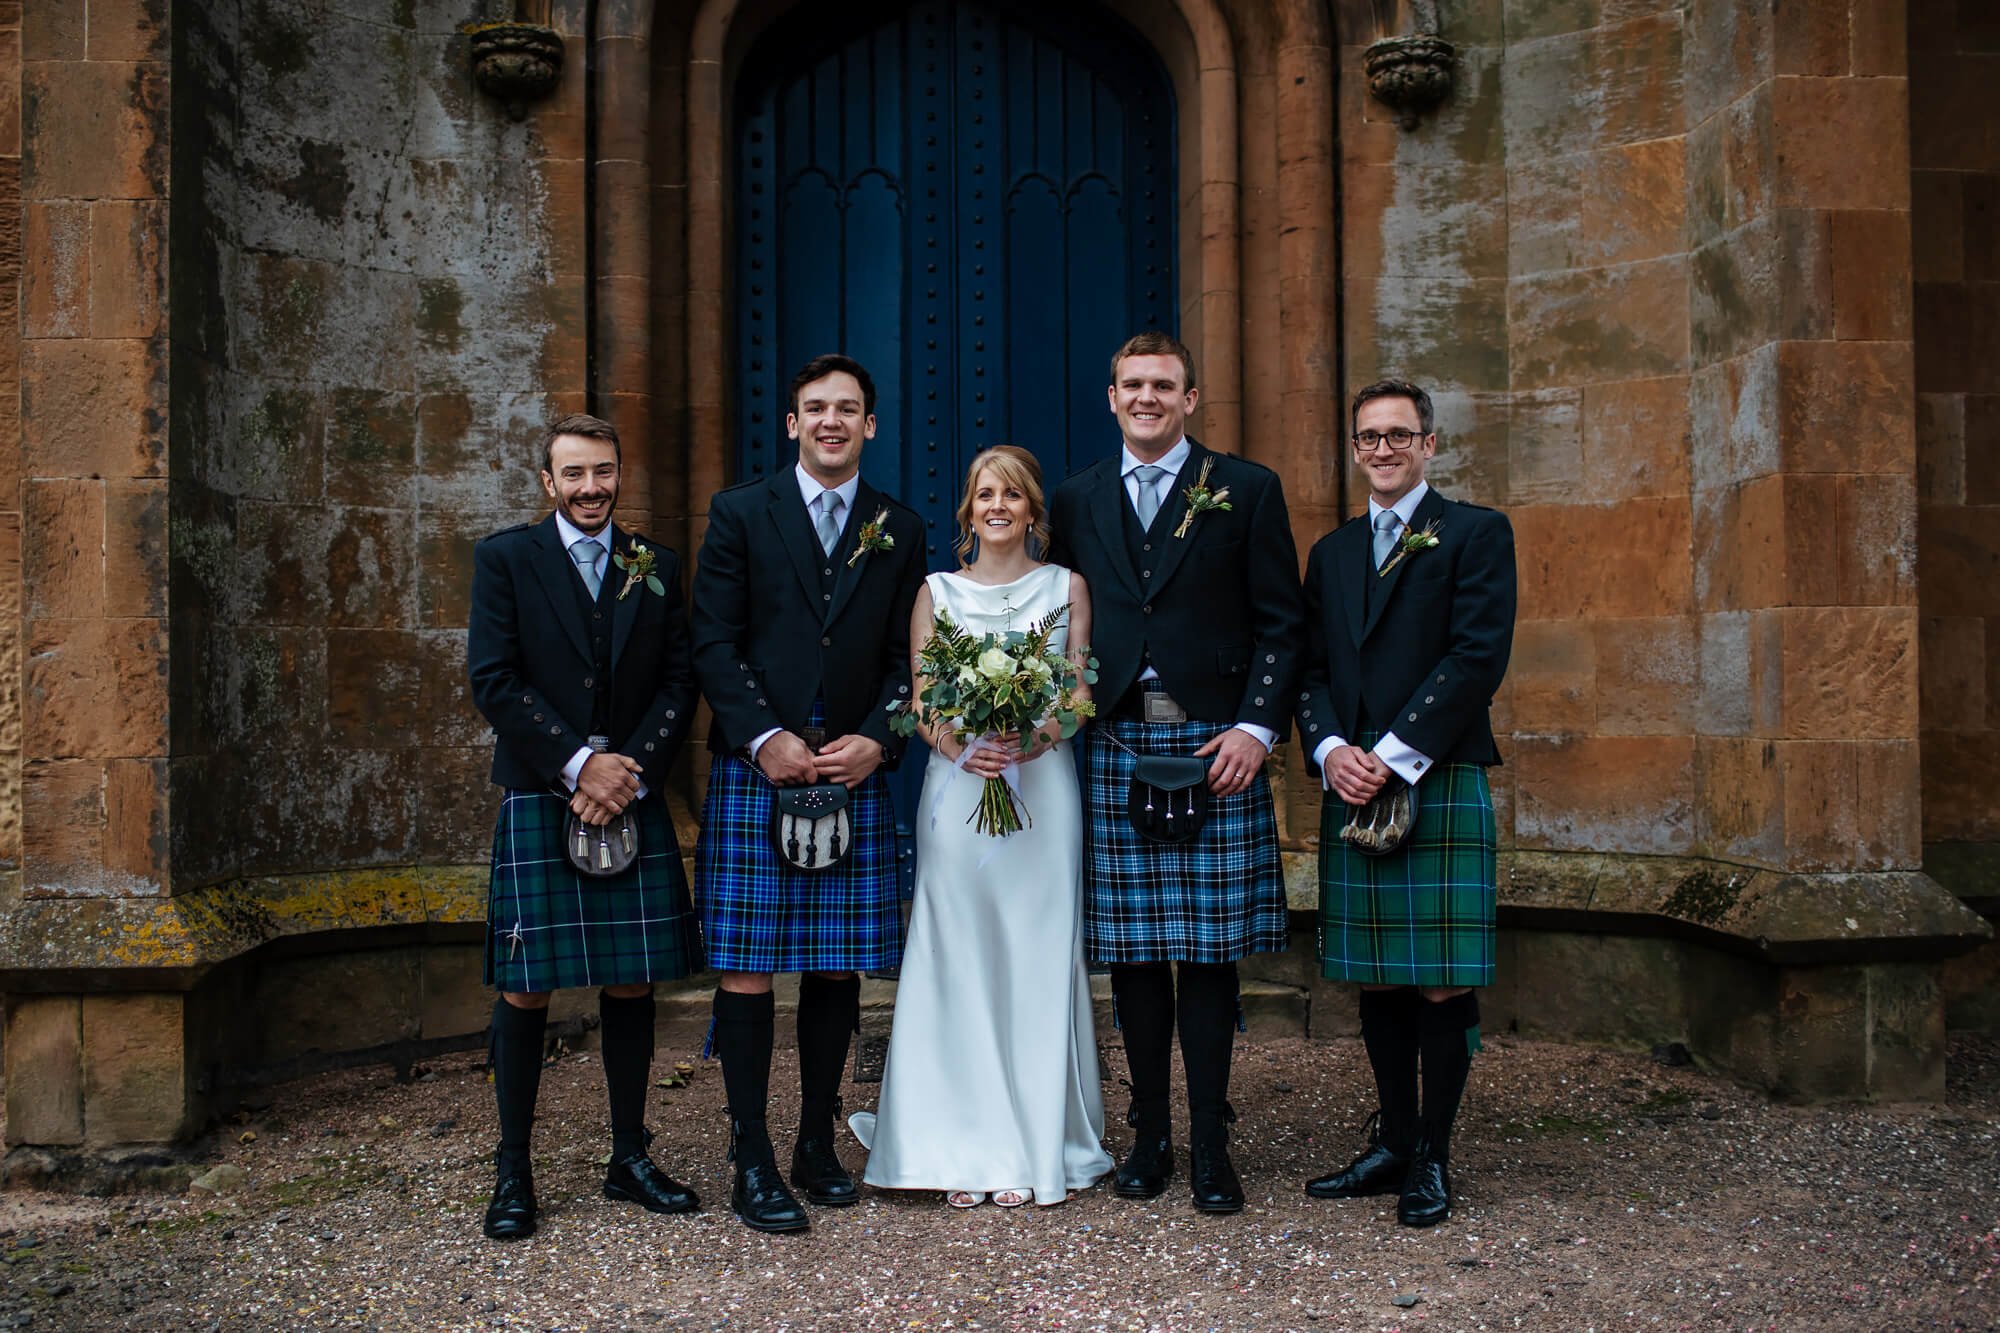 Bride and groomsmen outside the church in Kilconquhar